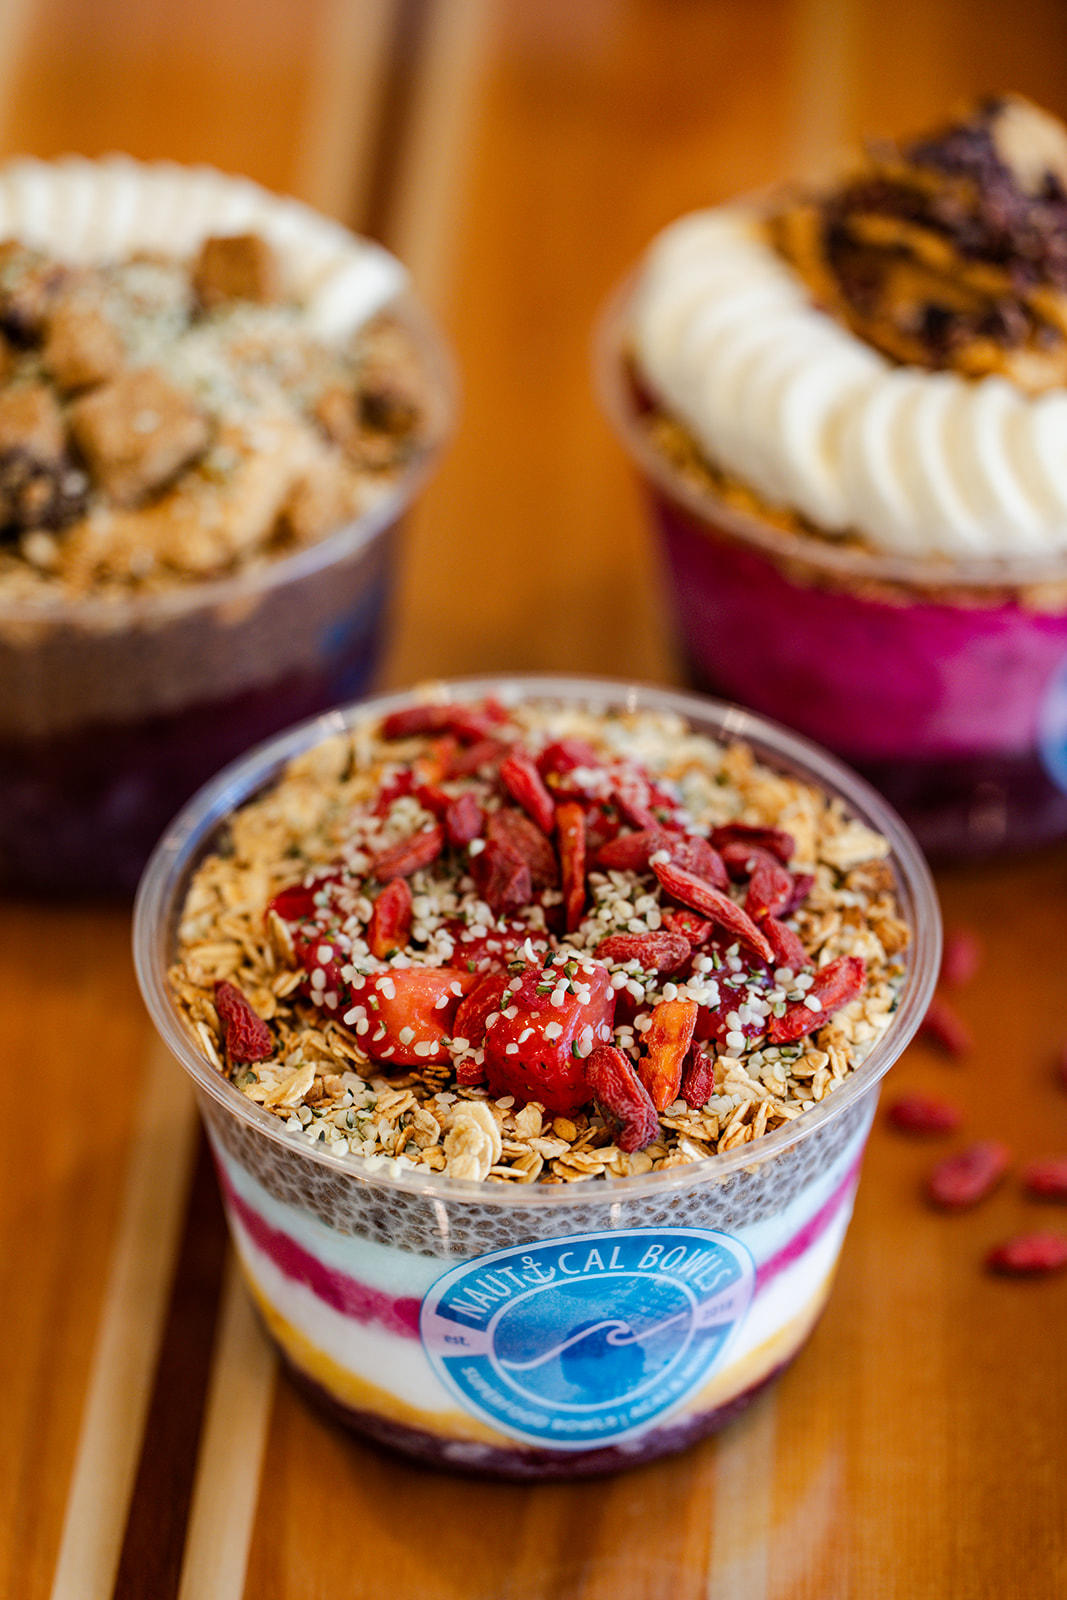 Visit our acai shop in Phoenix today or order online and get ready to experience the joy of a guilt-free snack. And remember to check out our website for exciting coupons and discounts.